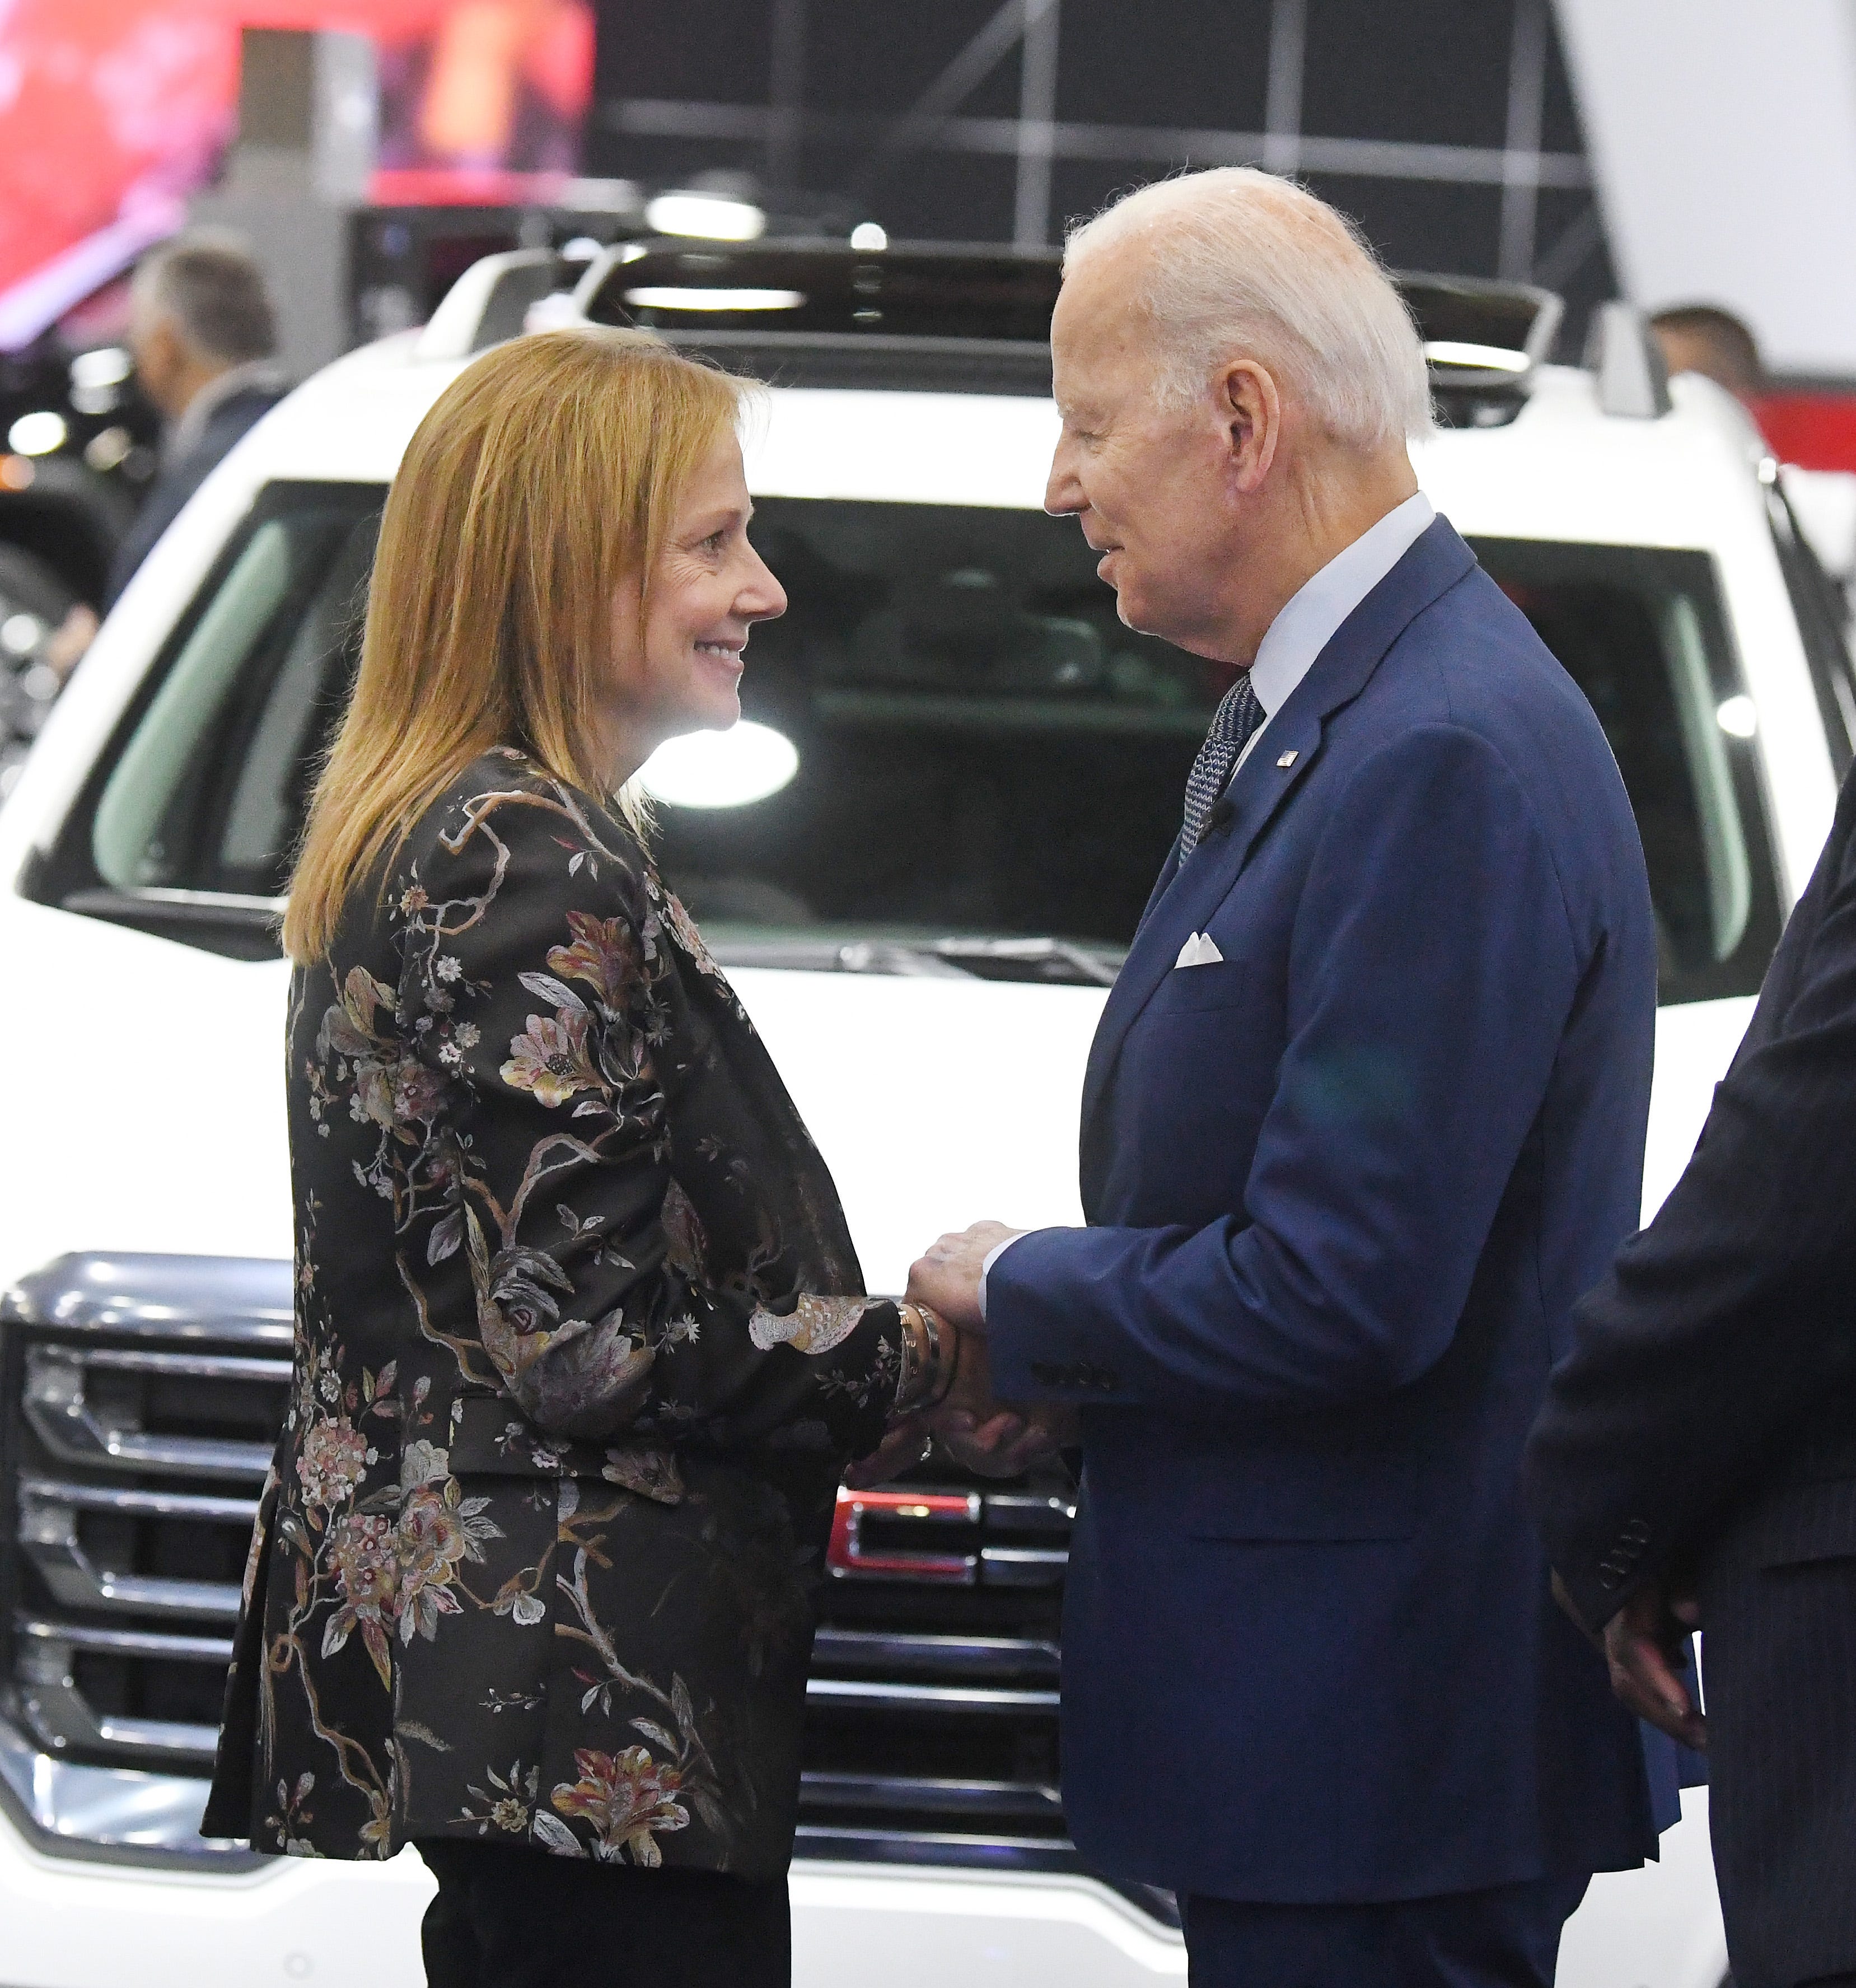 General Motors chair and chief executive officer Mary Barra greets President Joe Biden at the GM display during a tour of the 2022 North American International Auto Show in Detroit, Michigan on September 14, 2022.